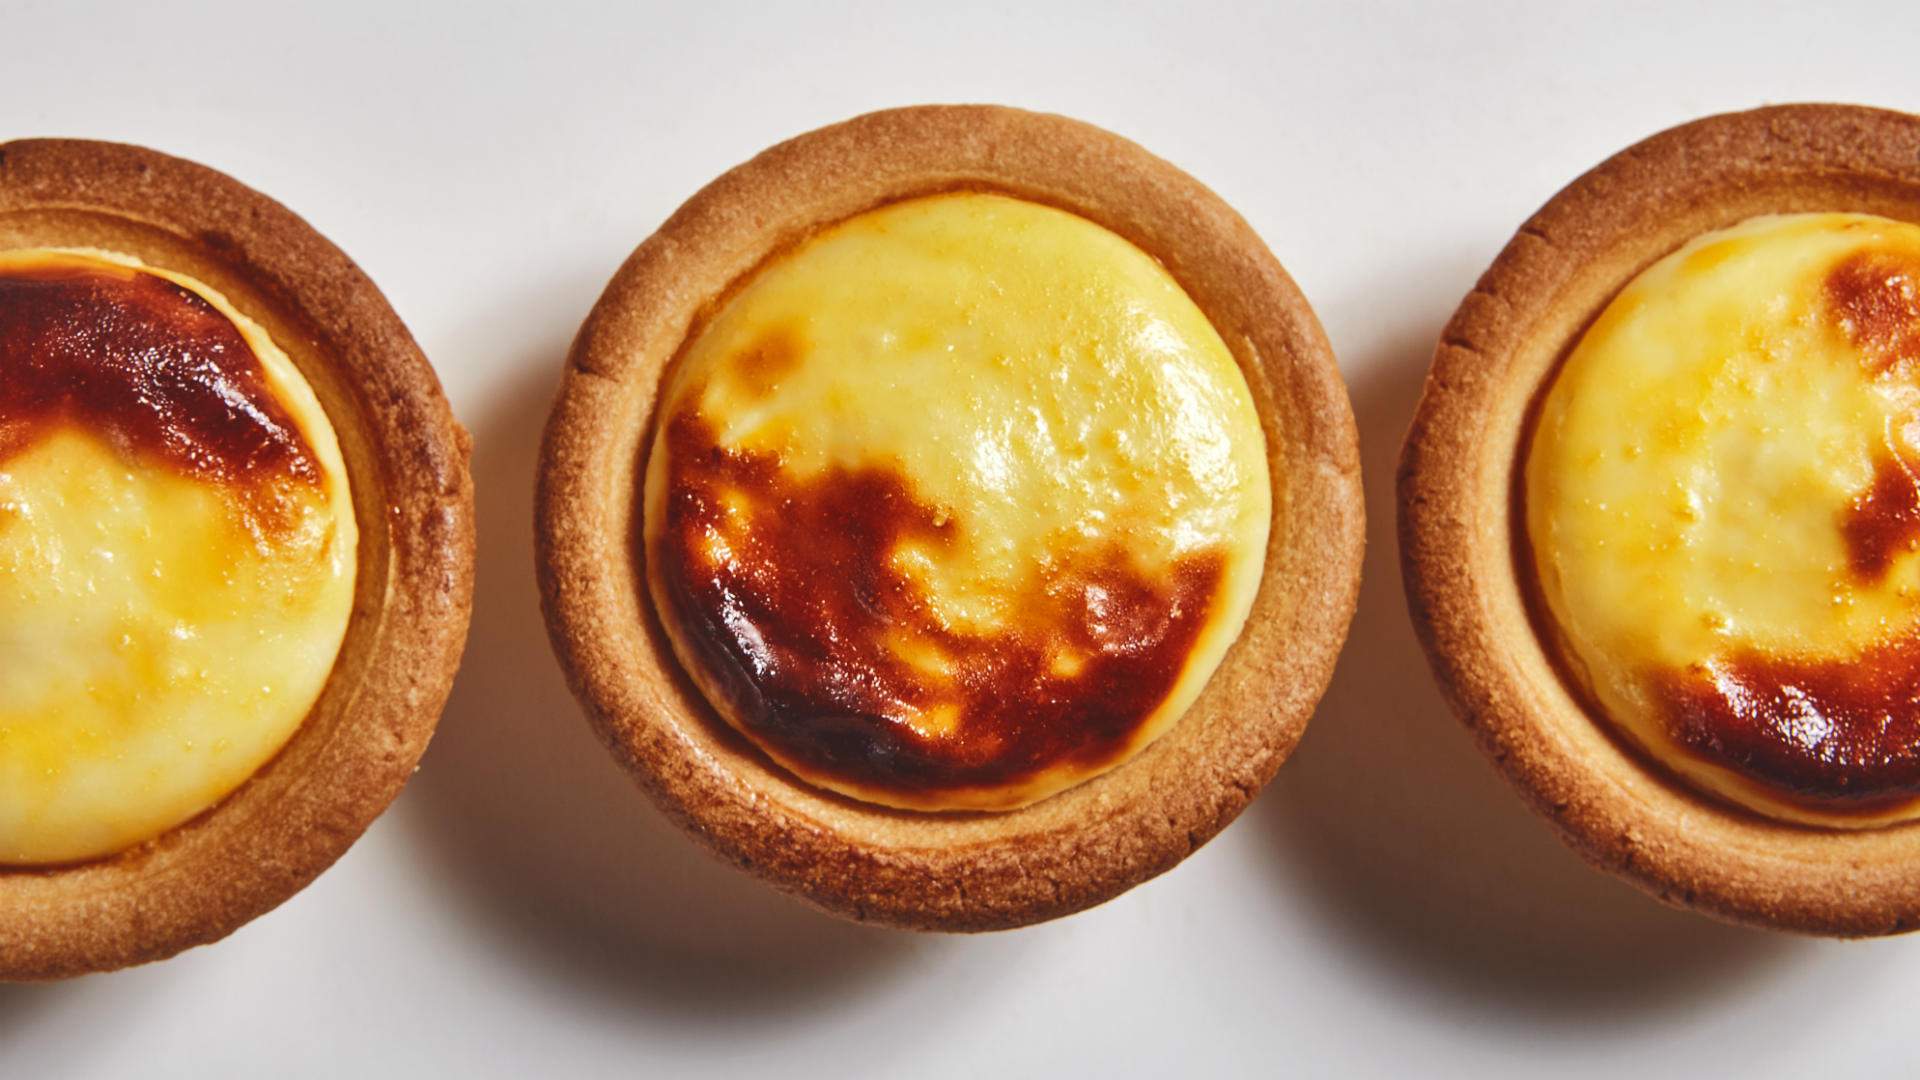 Malaysia's Insanely Popular Baked Three-Cheese Tarts Are Coming to Queensland